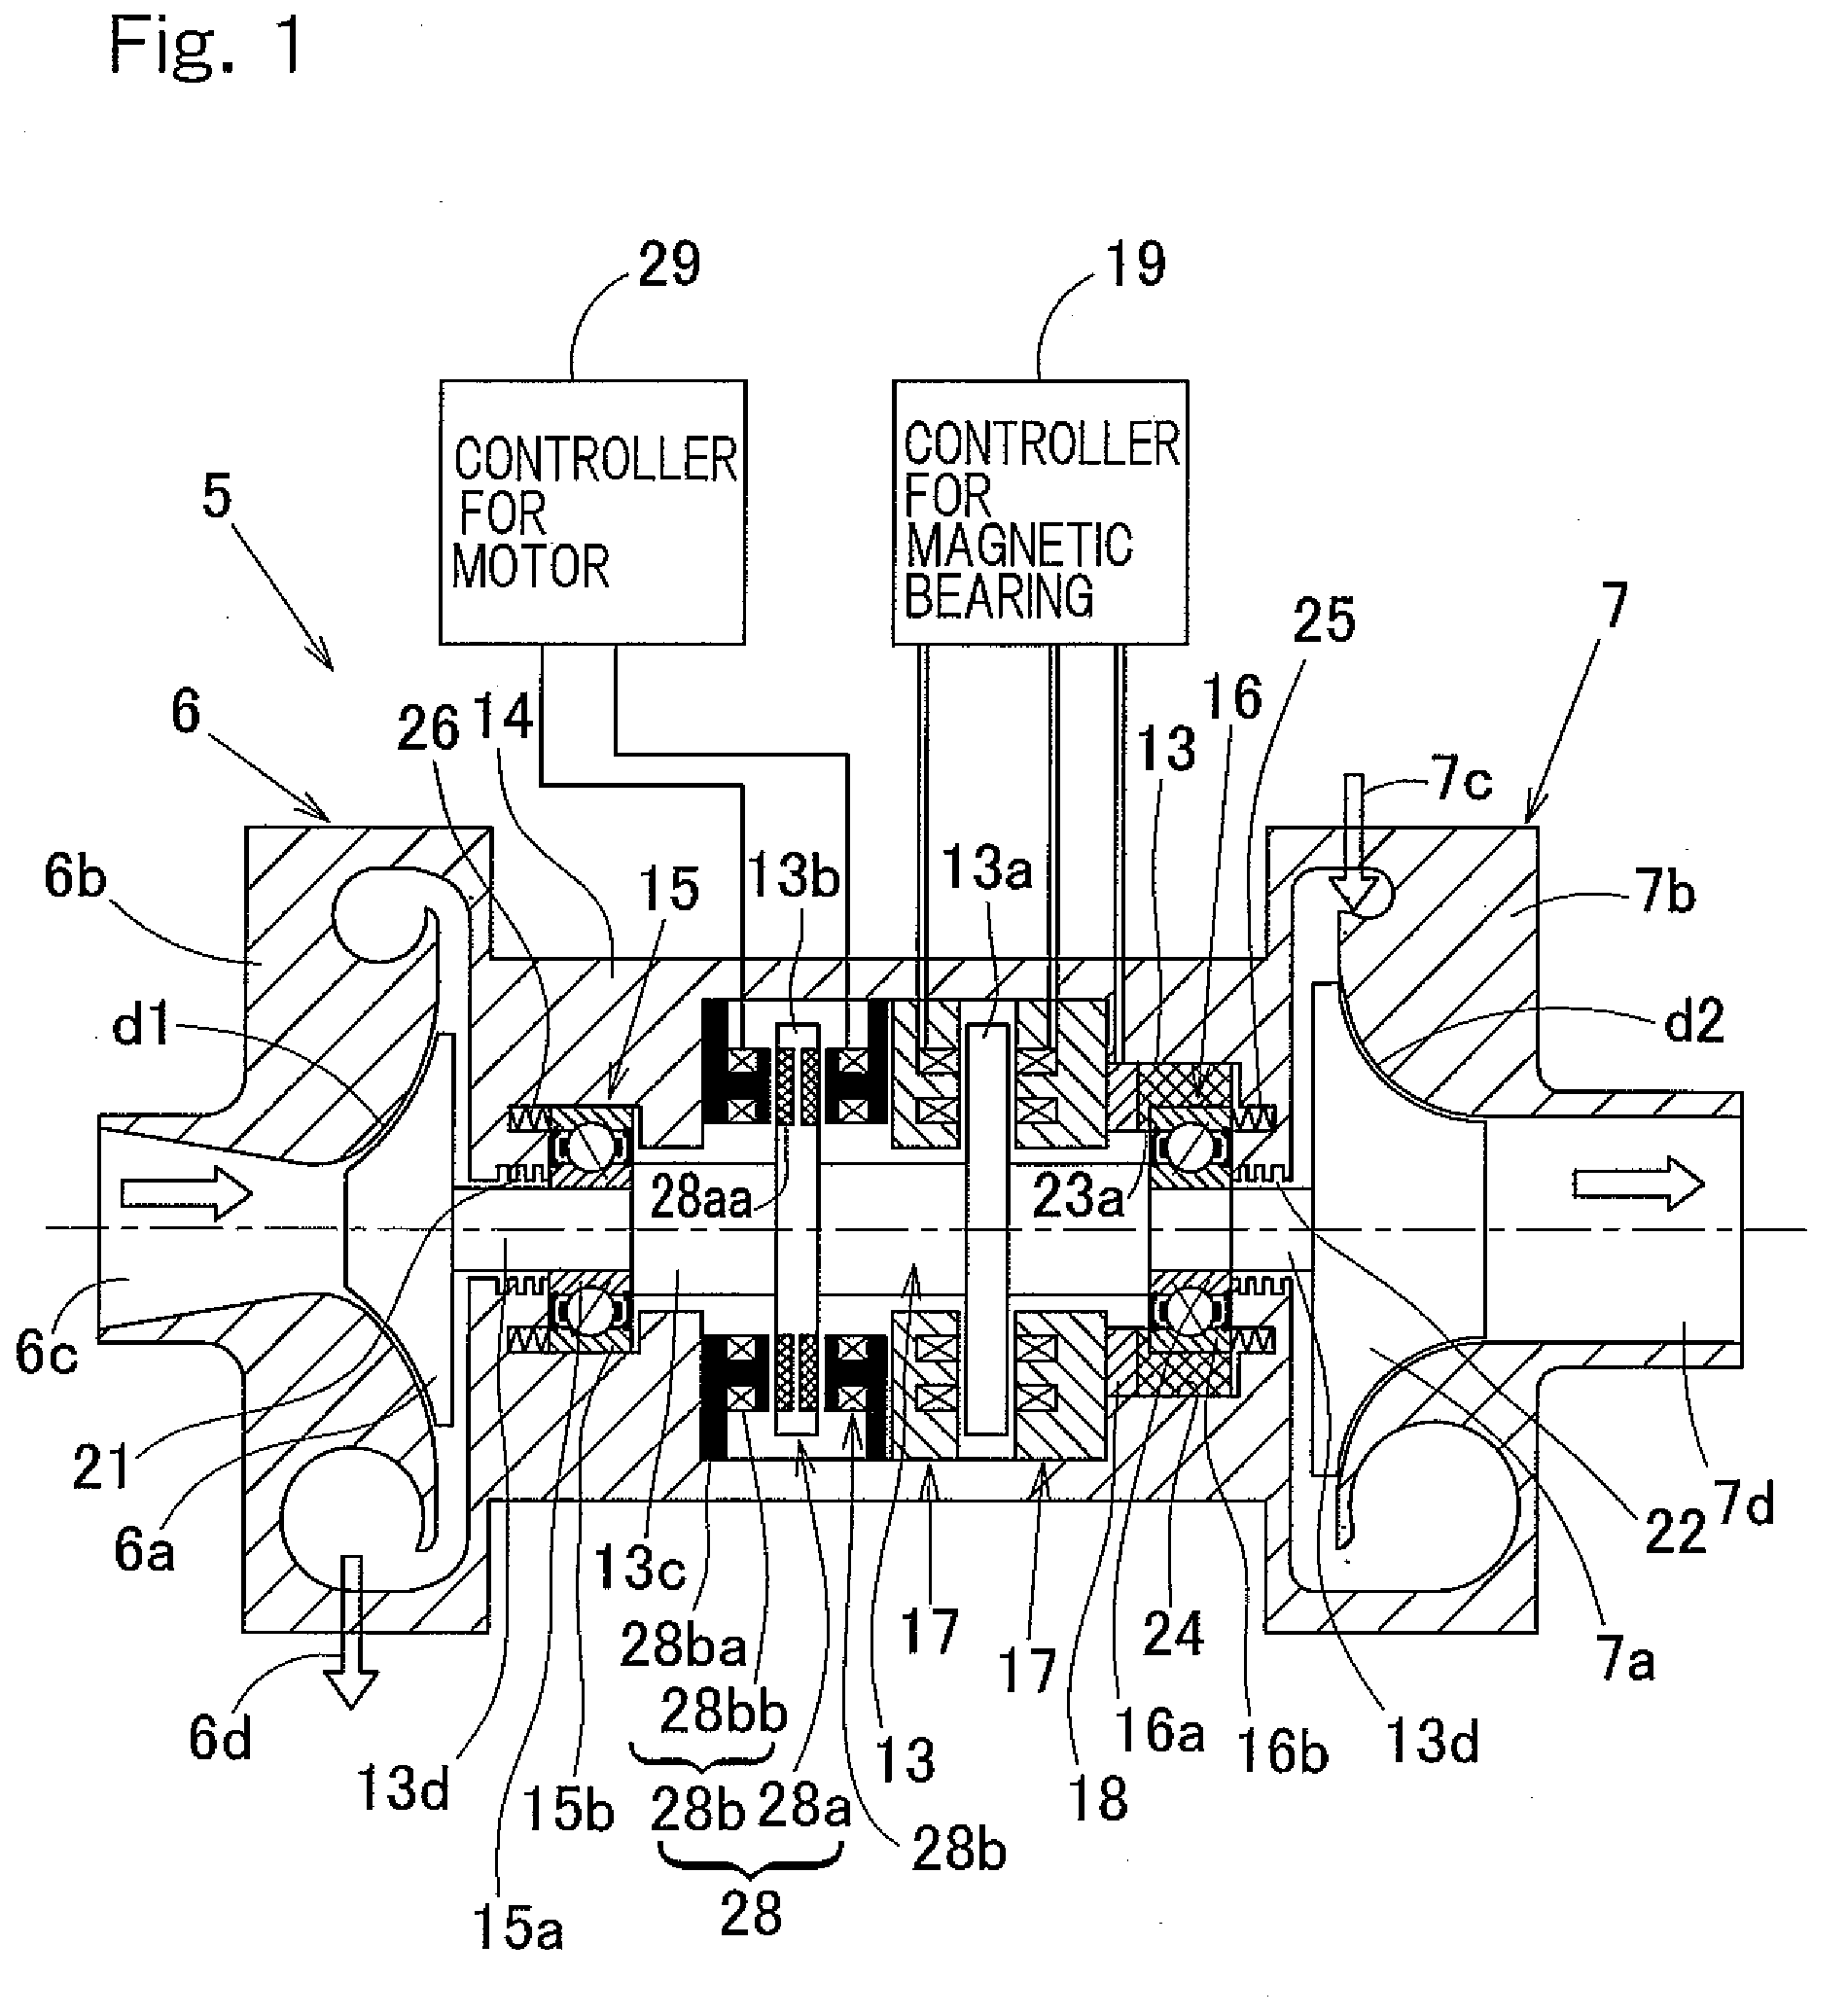 Motor built-in magnetic bearing device